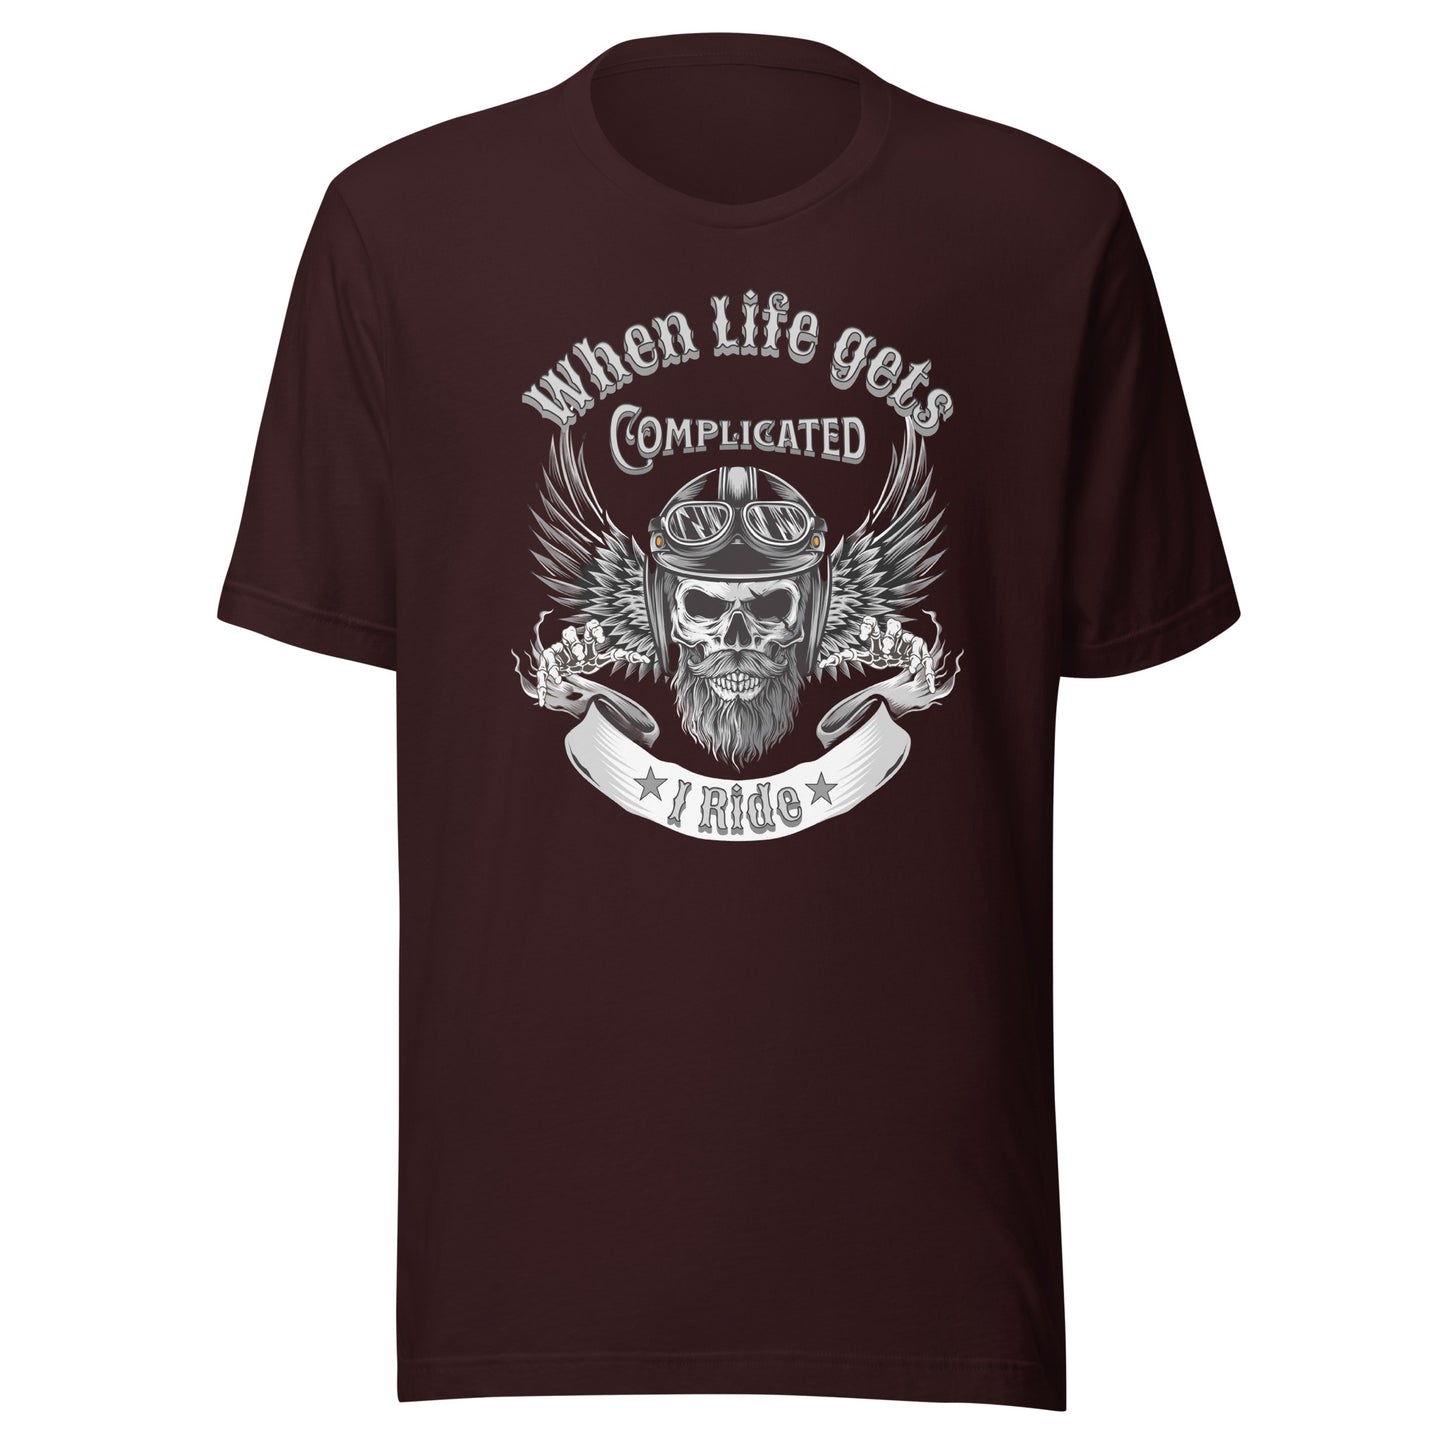 When Life Gets Complicated, I Ride Unisex T-shirt